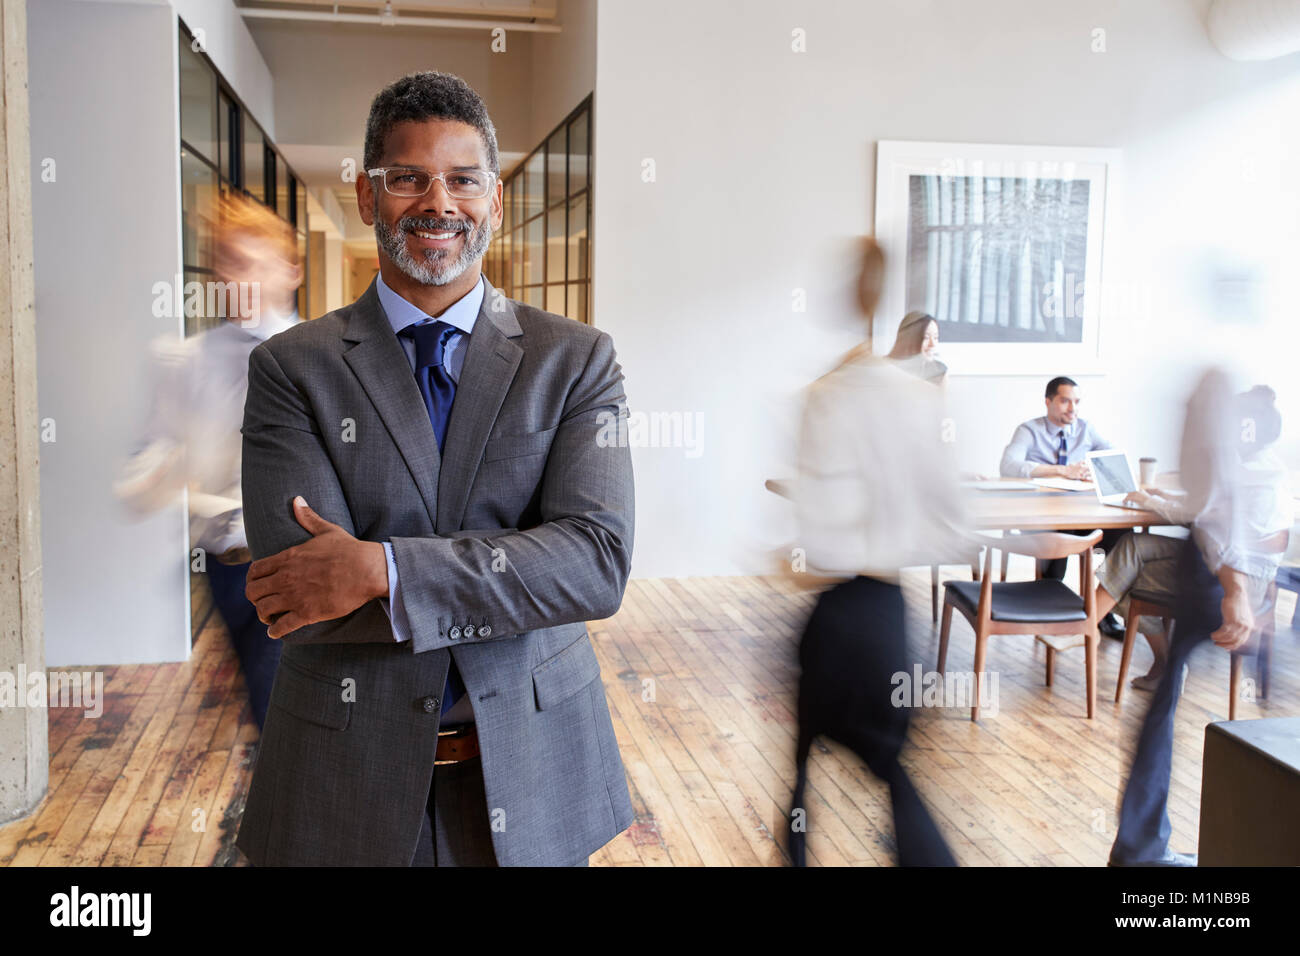 Portrait of middle aged black man in a busy modern workplace Stock Photo